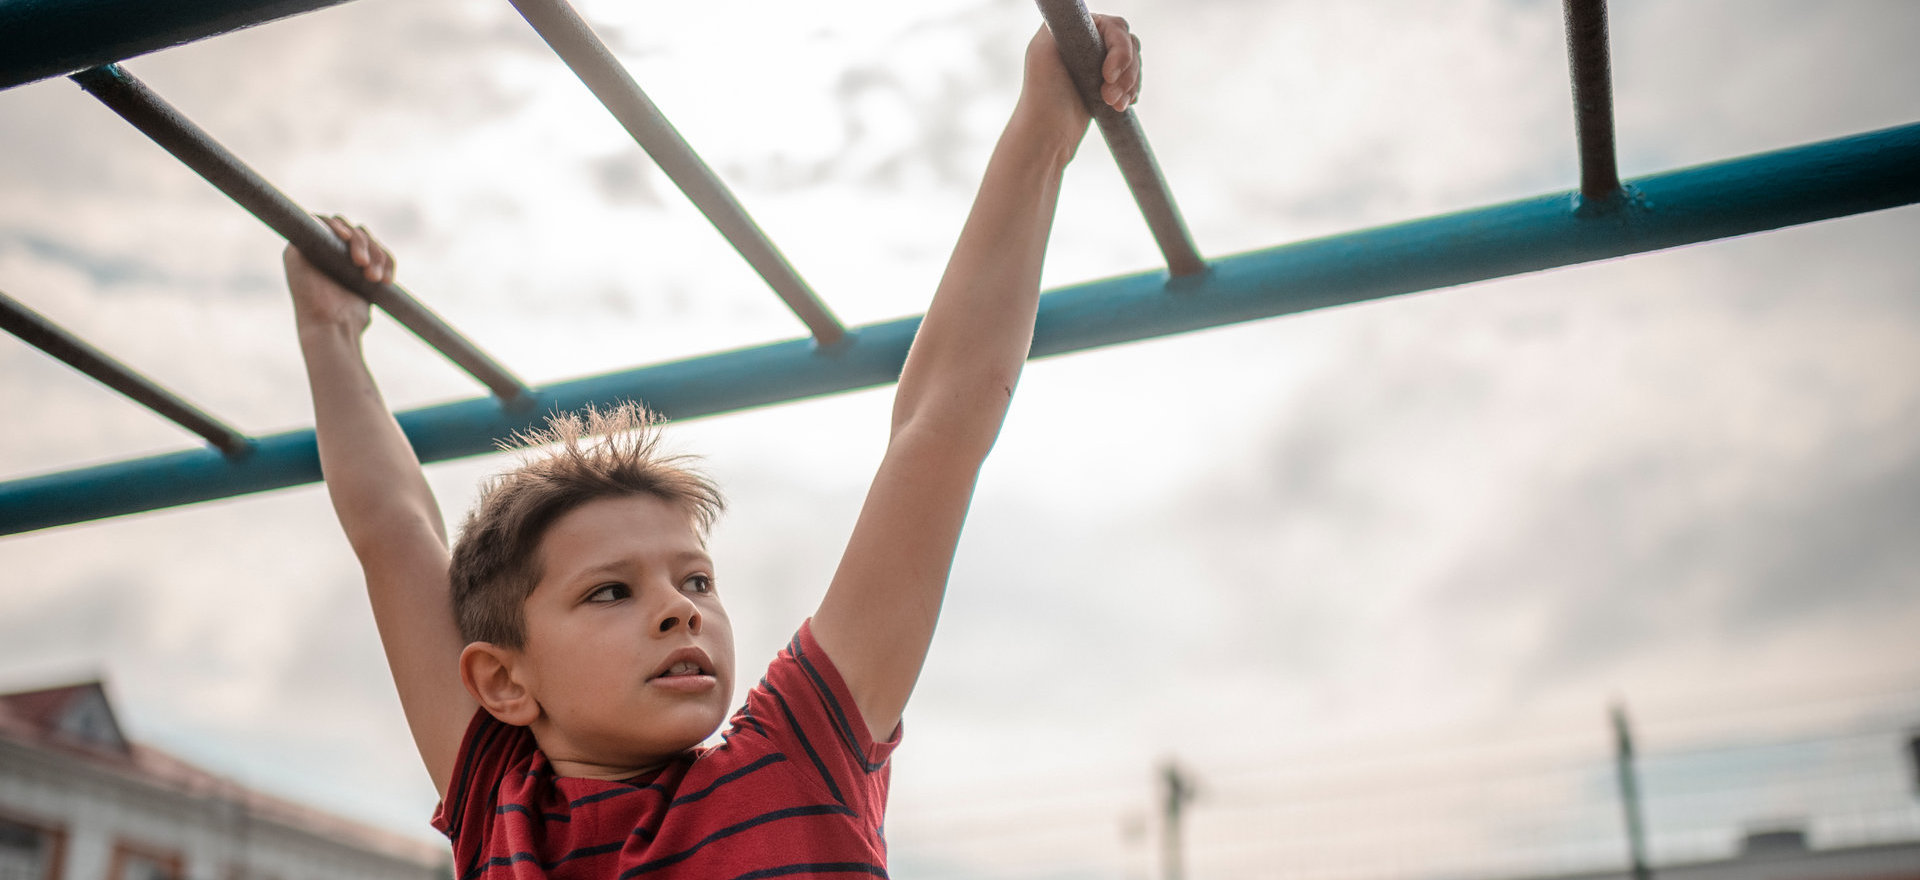 A boy swings from monkey bars in a playground